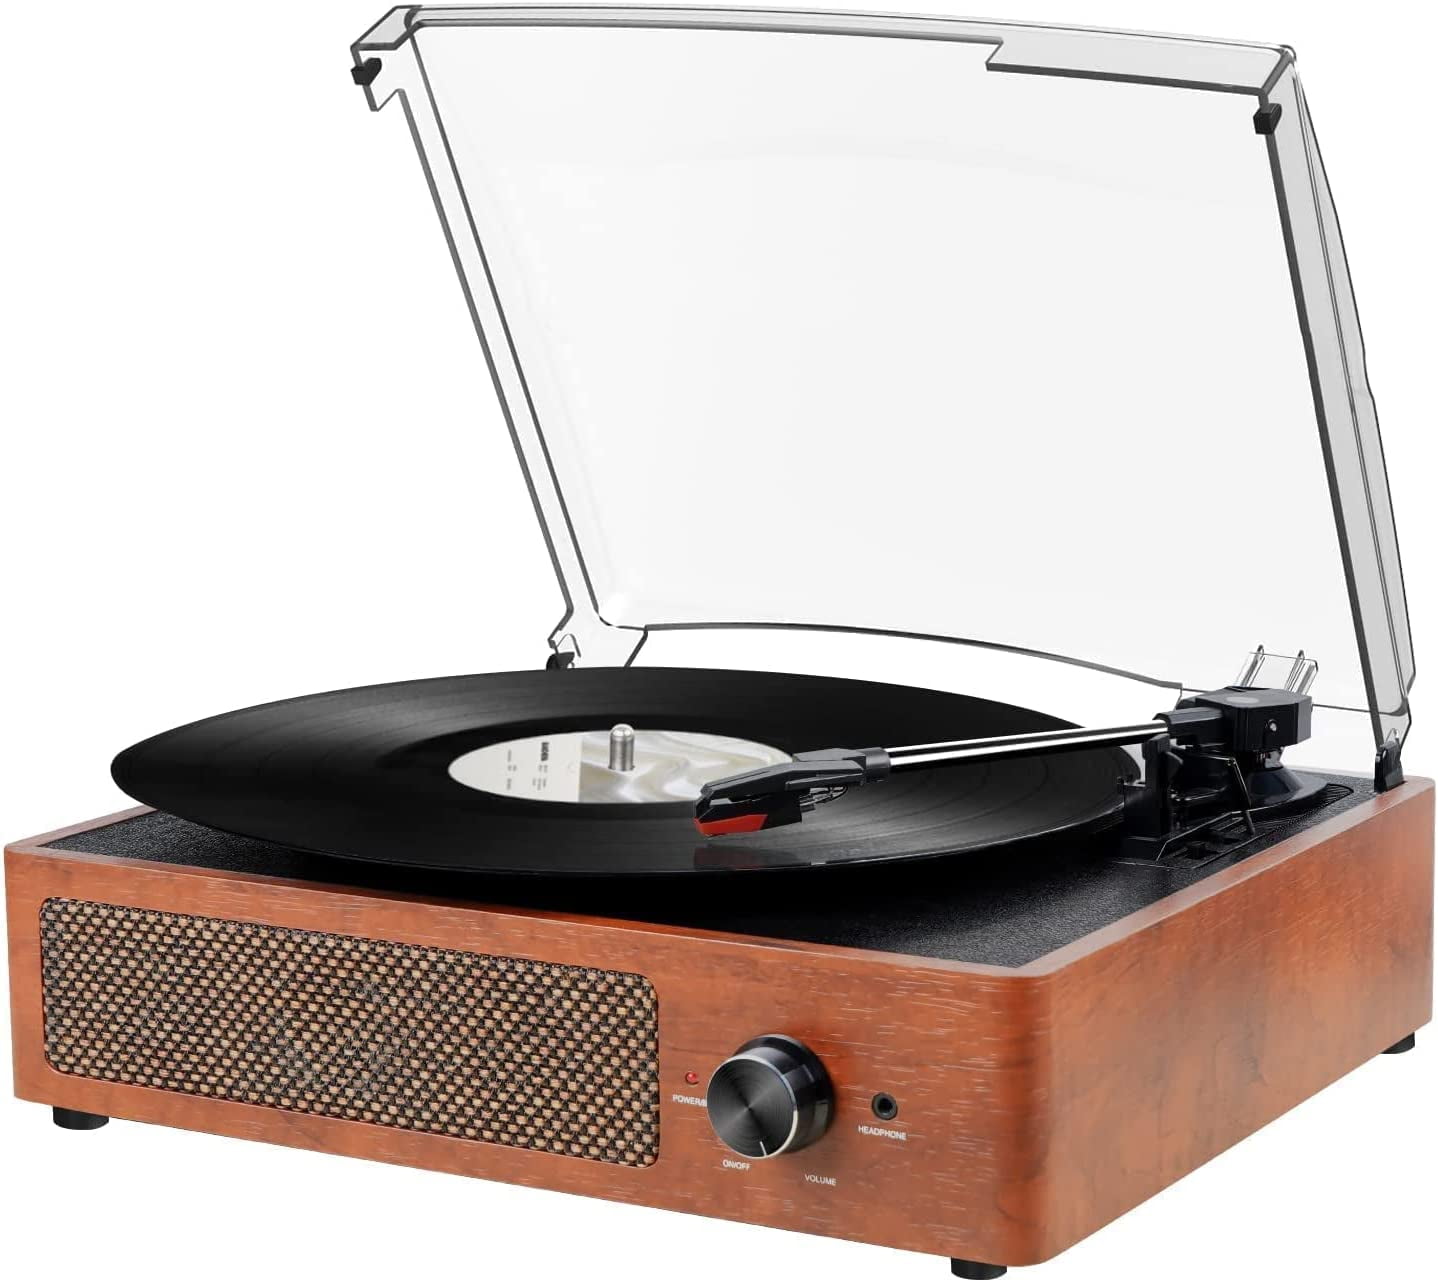 DIGITNOW Vinyl Record Player 3 Speeds with Built-in Stereo